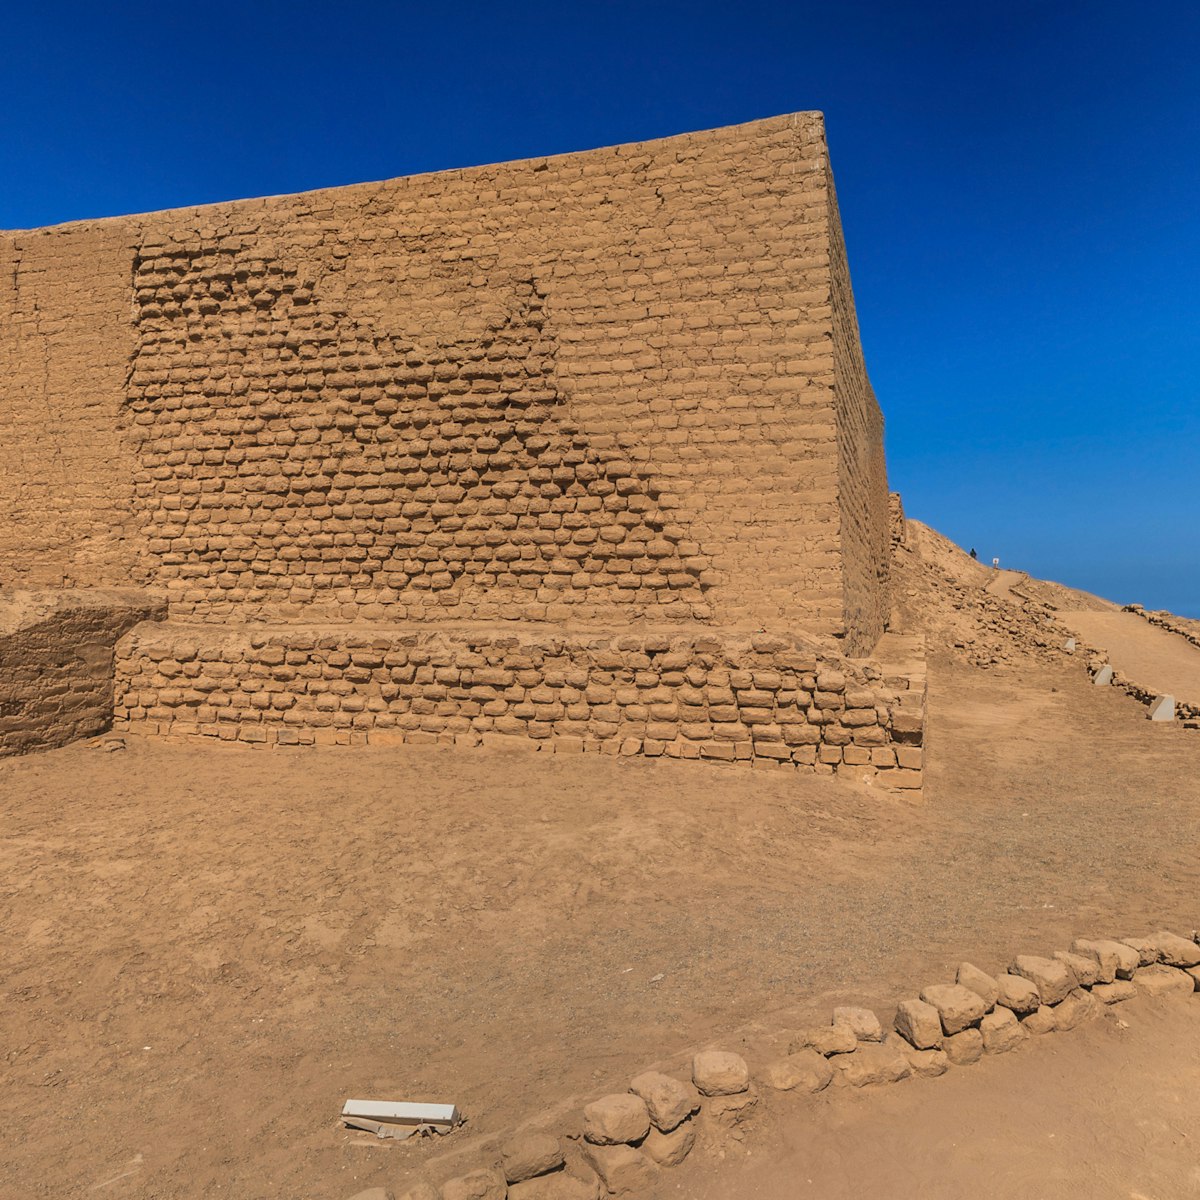 Pachacamac ruins in Lima, Peru.; Shutterstock ID 135292445; Your name (First / Last): Josh Vogel; GL account no.: 56530; Netsuite department name: Online Design; Full Product or Project name including edition: Digital Content/Sights